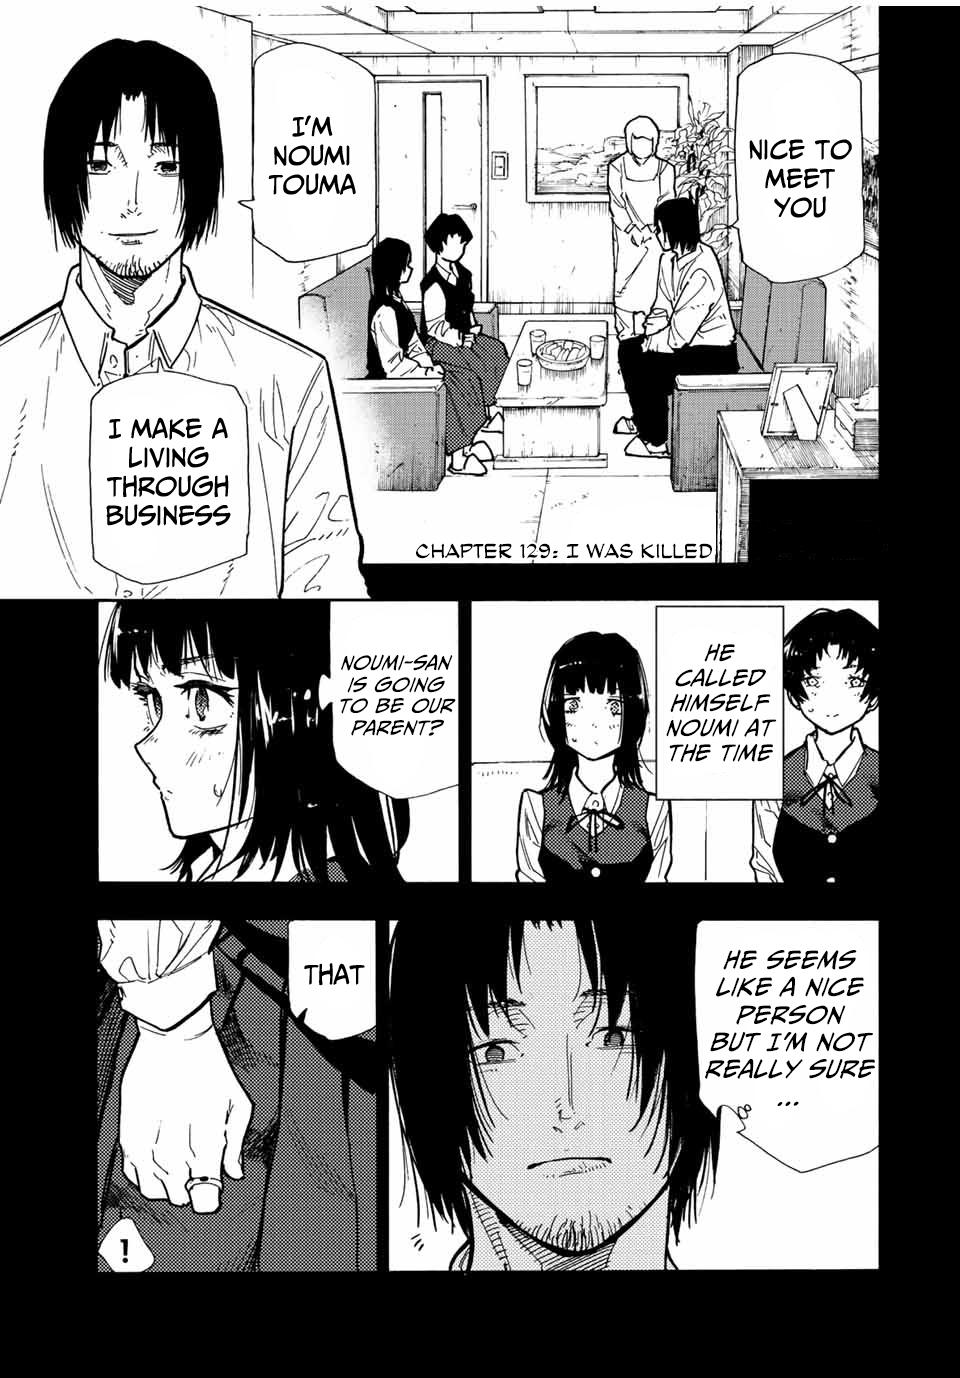 Juujika No Rokunin Ch 1 Juujika no Rokunin, Chapter 129 | TcbScans Org - Free Manga Online in High  Quality